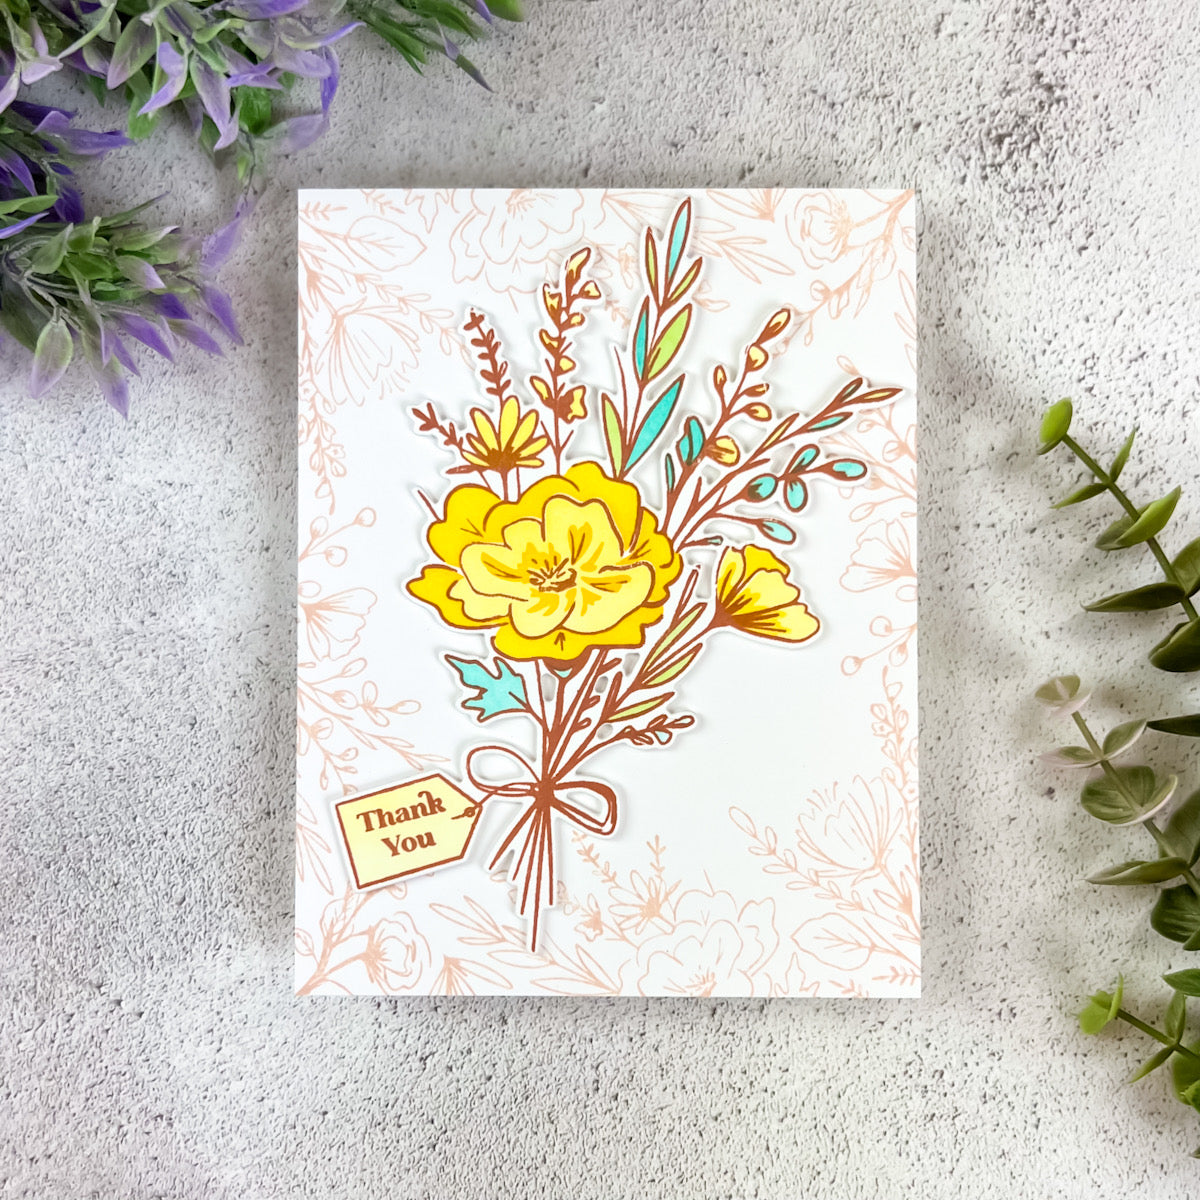 Flower Market Bouquet Stamp Set – The Greetery